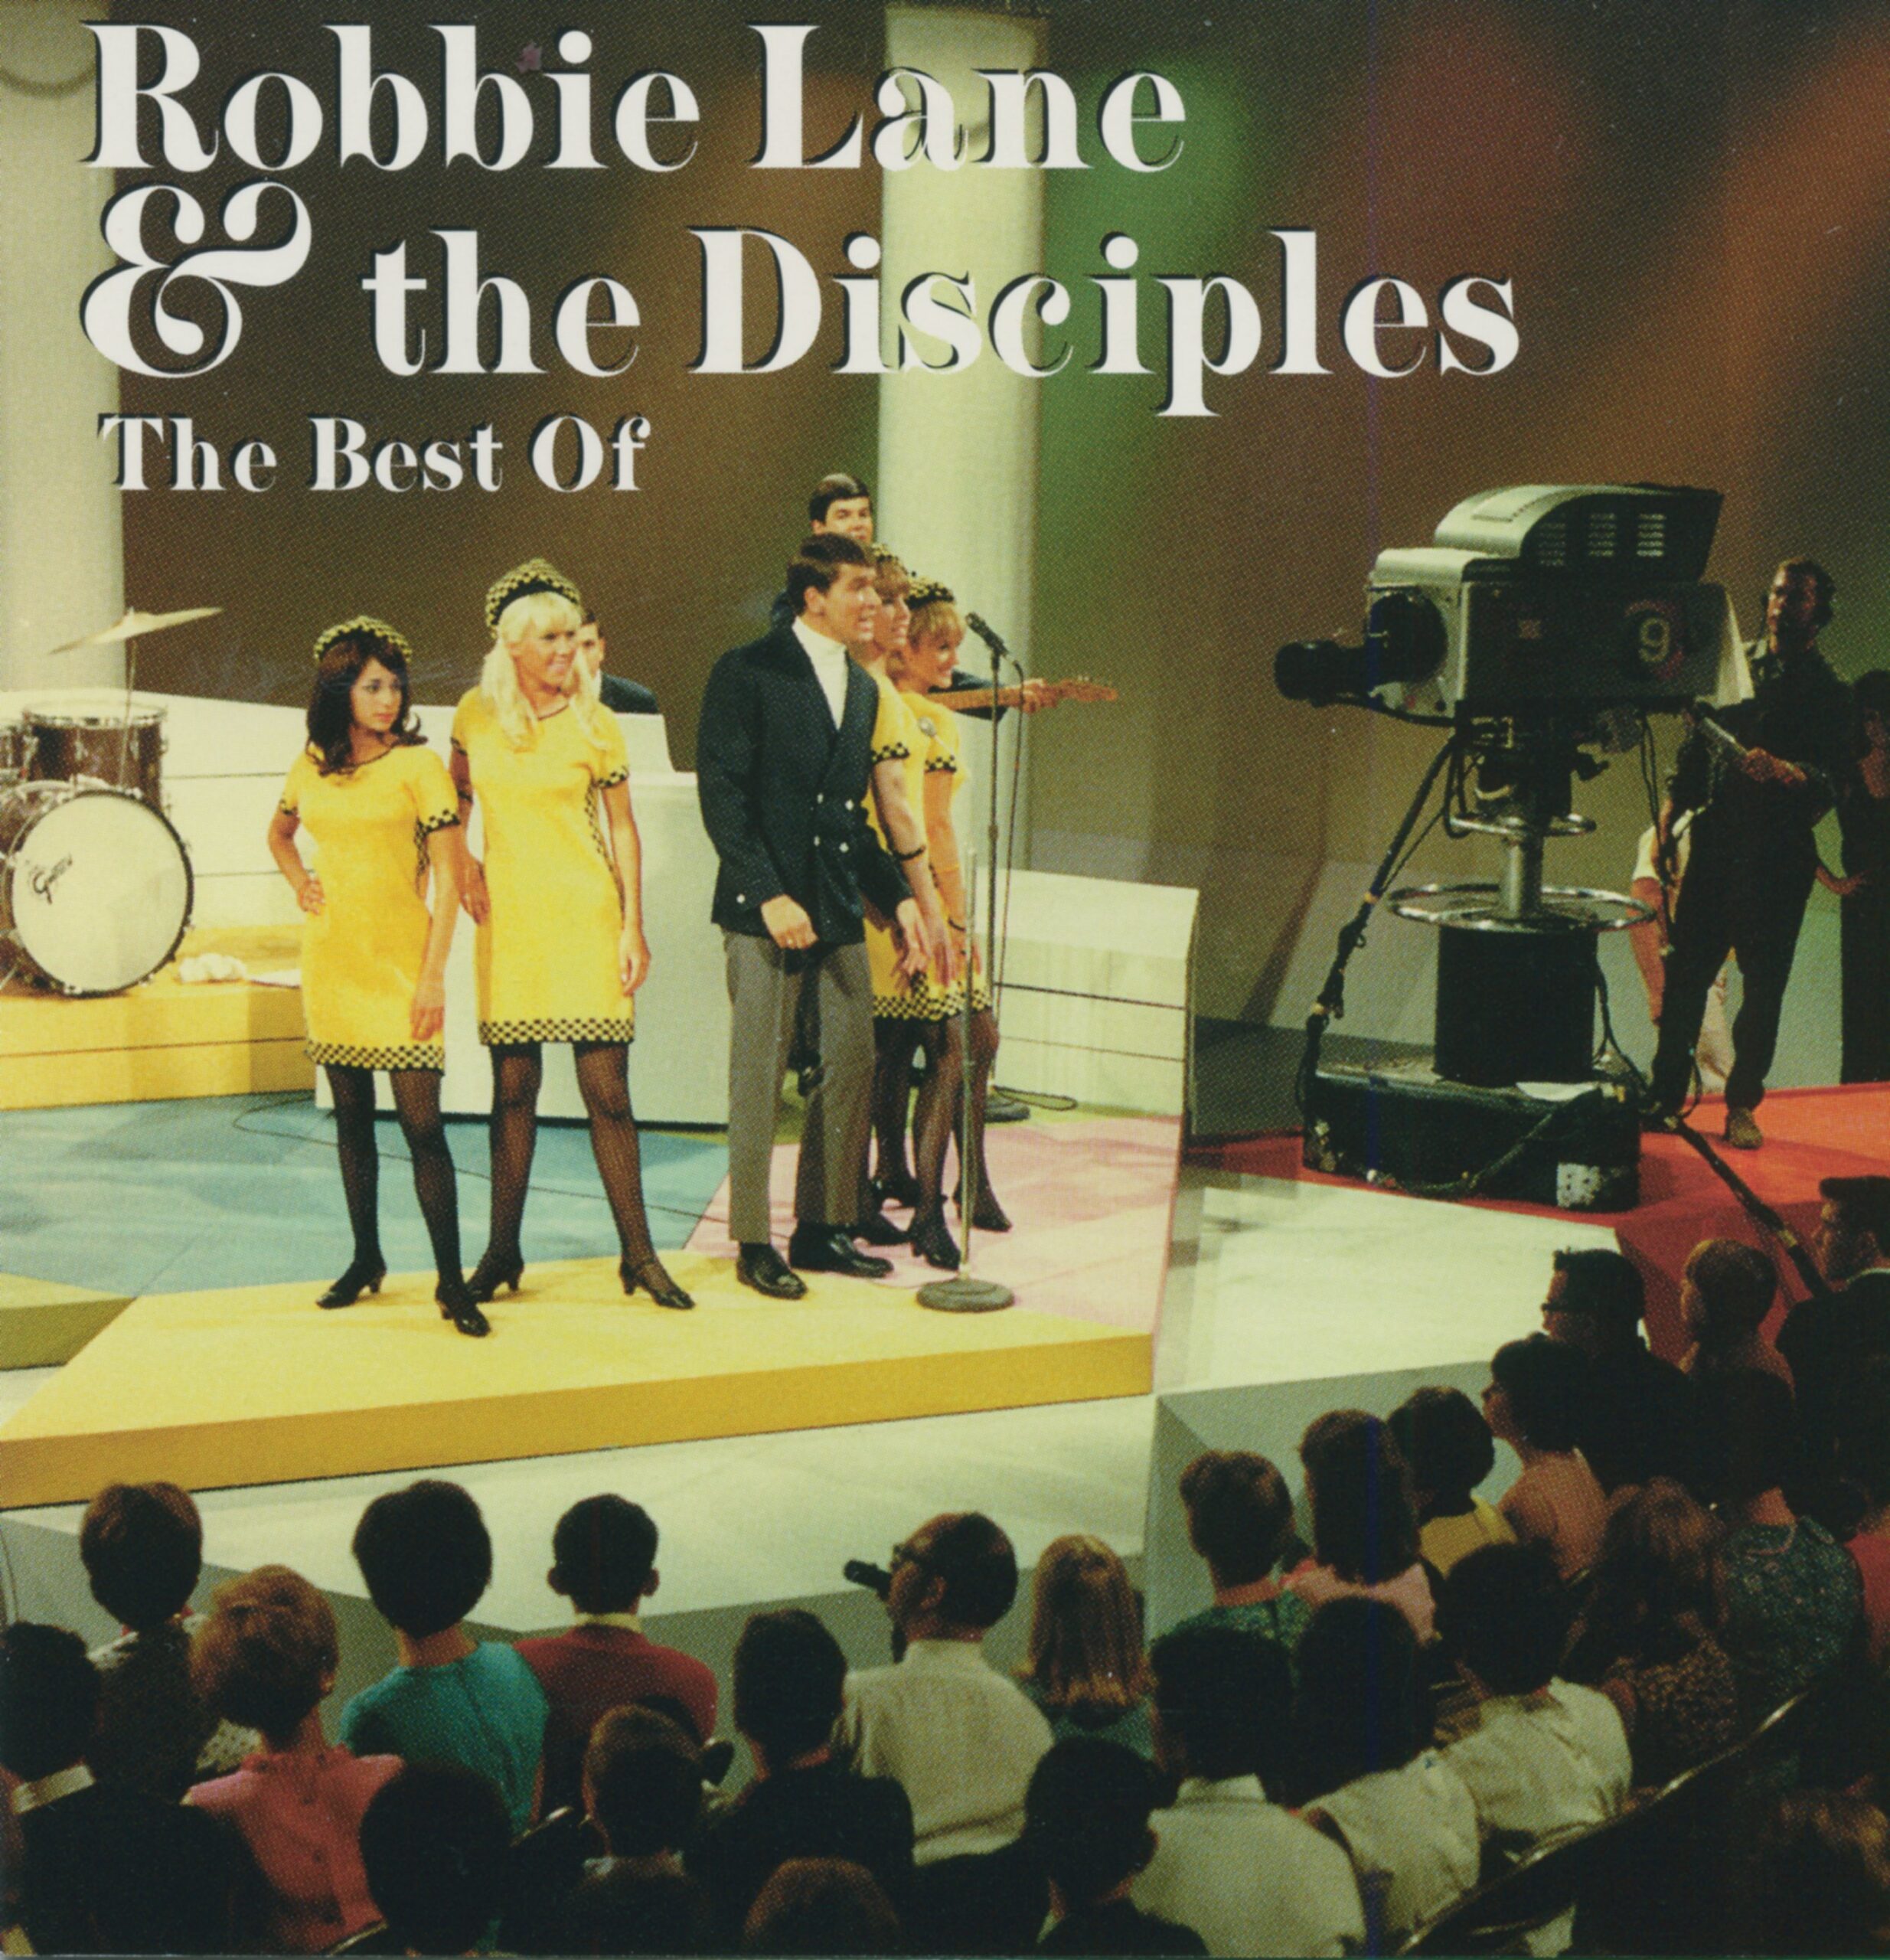 You are currently viewing Lane, Robbie and the Disciples